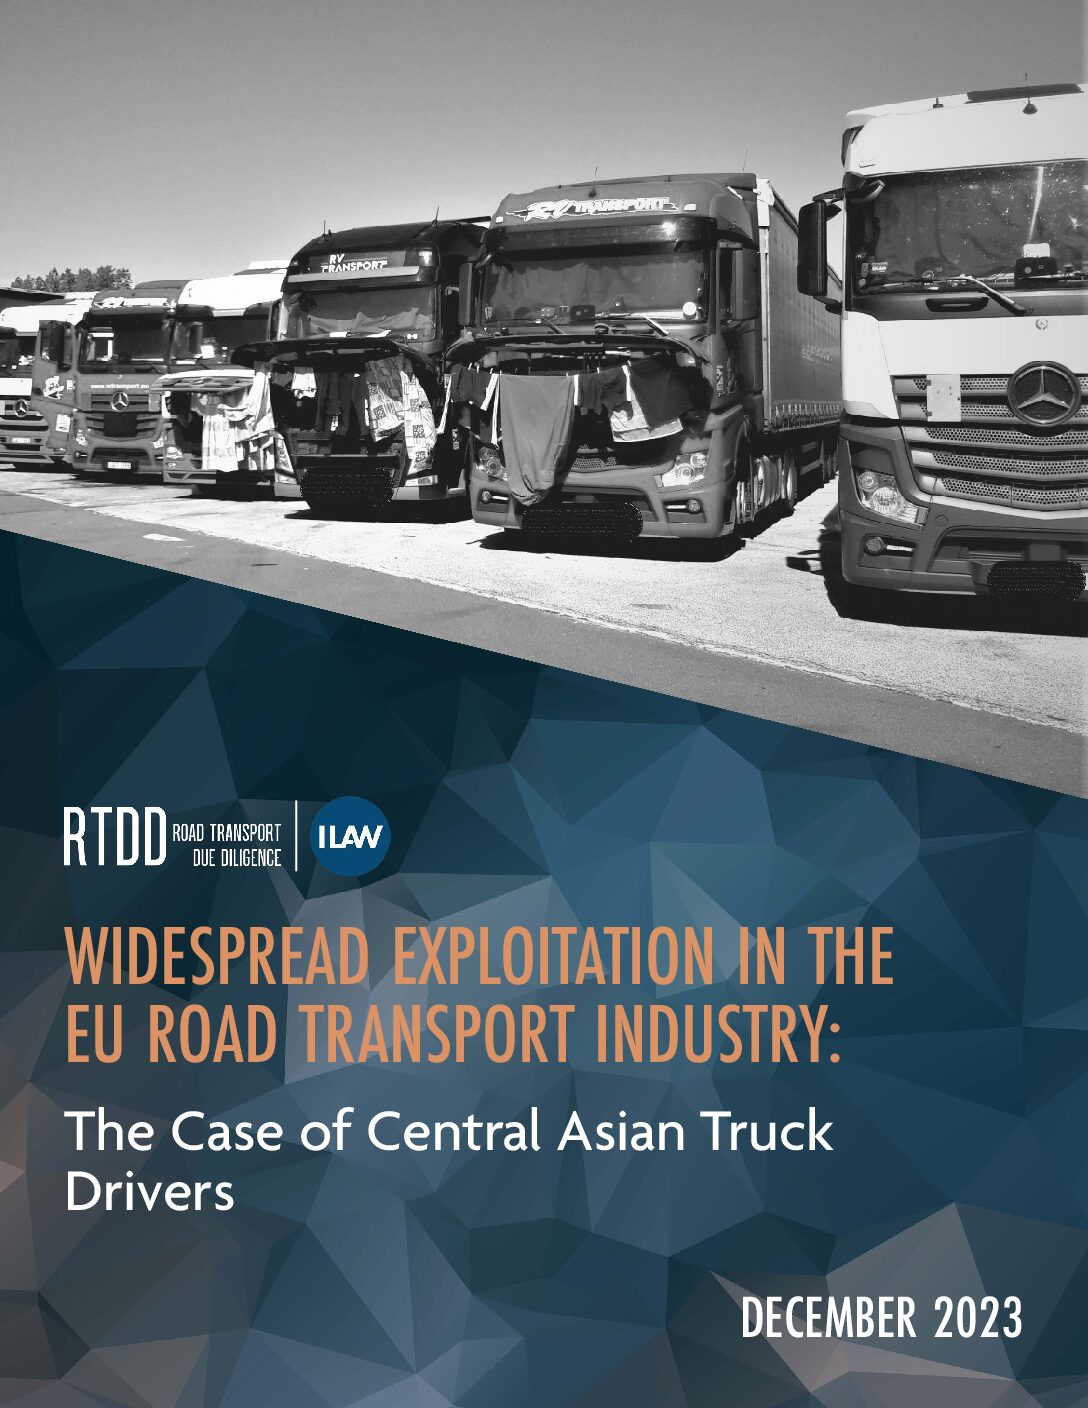 Widespread Exploitation in the EU Road Transport Industry: The Case of Central Asian Truck Drivers